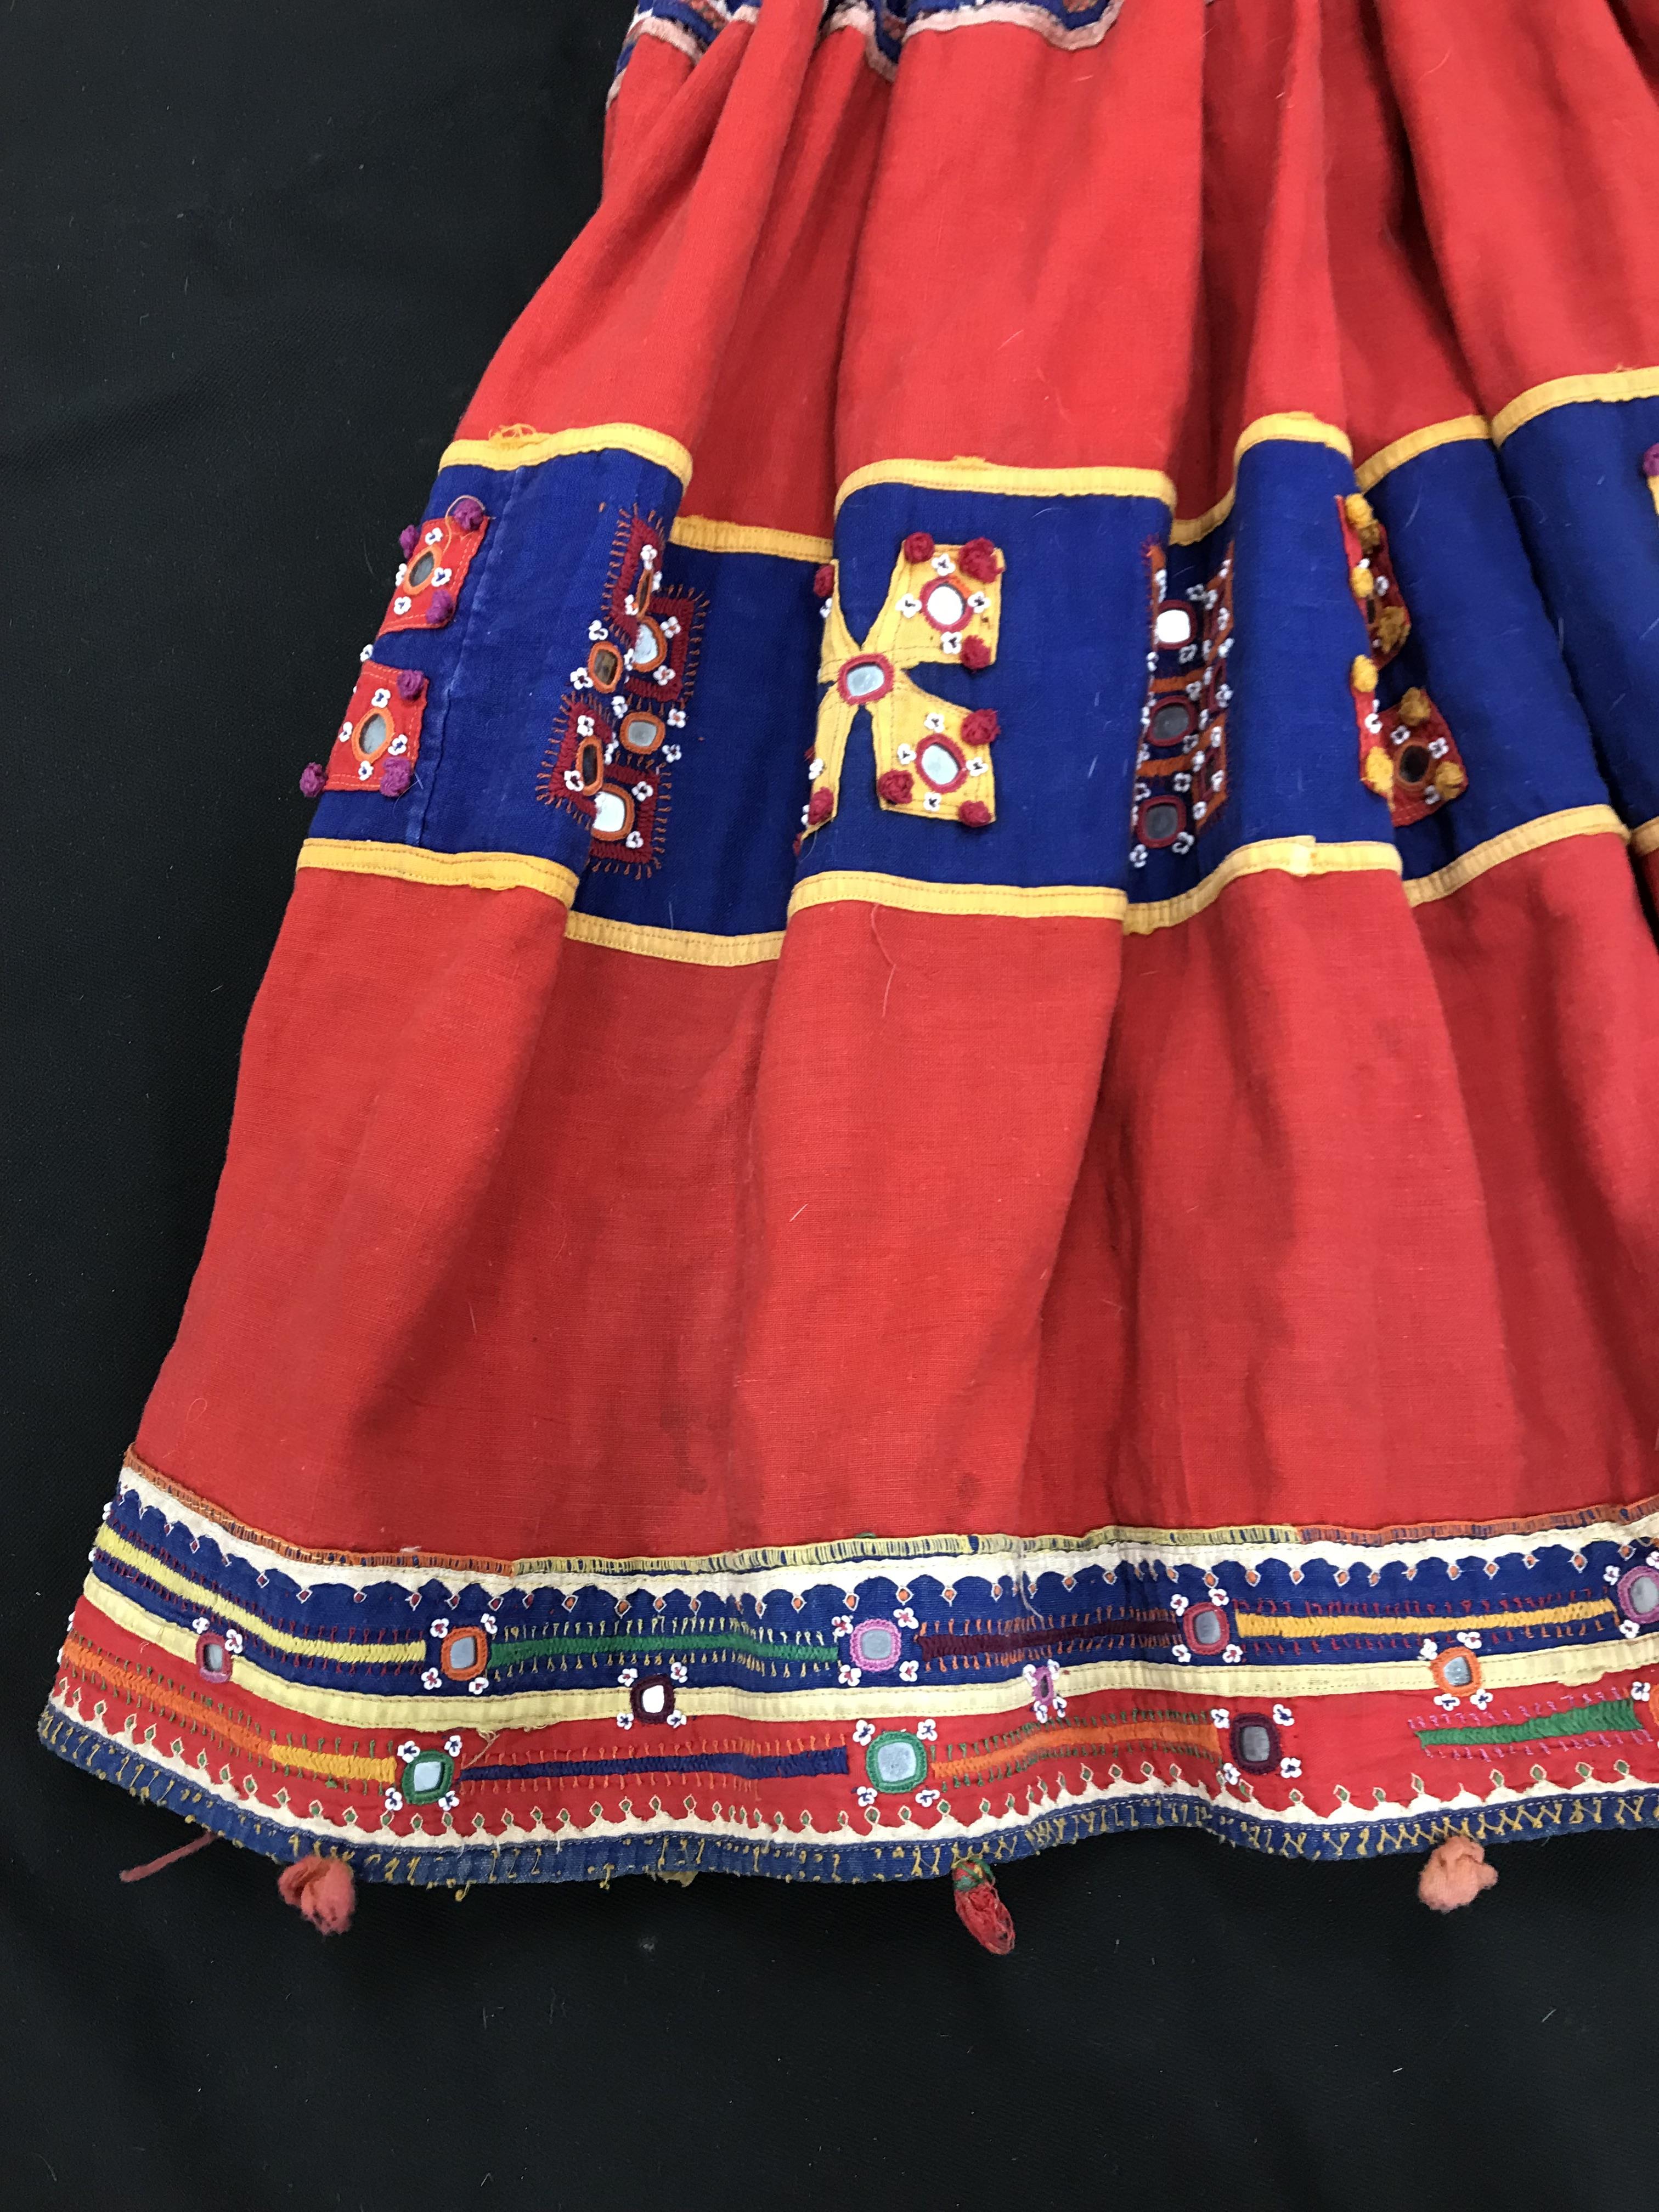 A Rajhistani skirt in red and blue stripes with overlaid embroidery and mirrored decorations, - Image 4 of 14